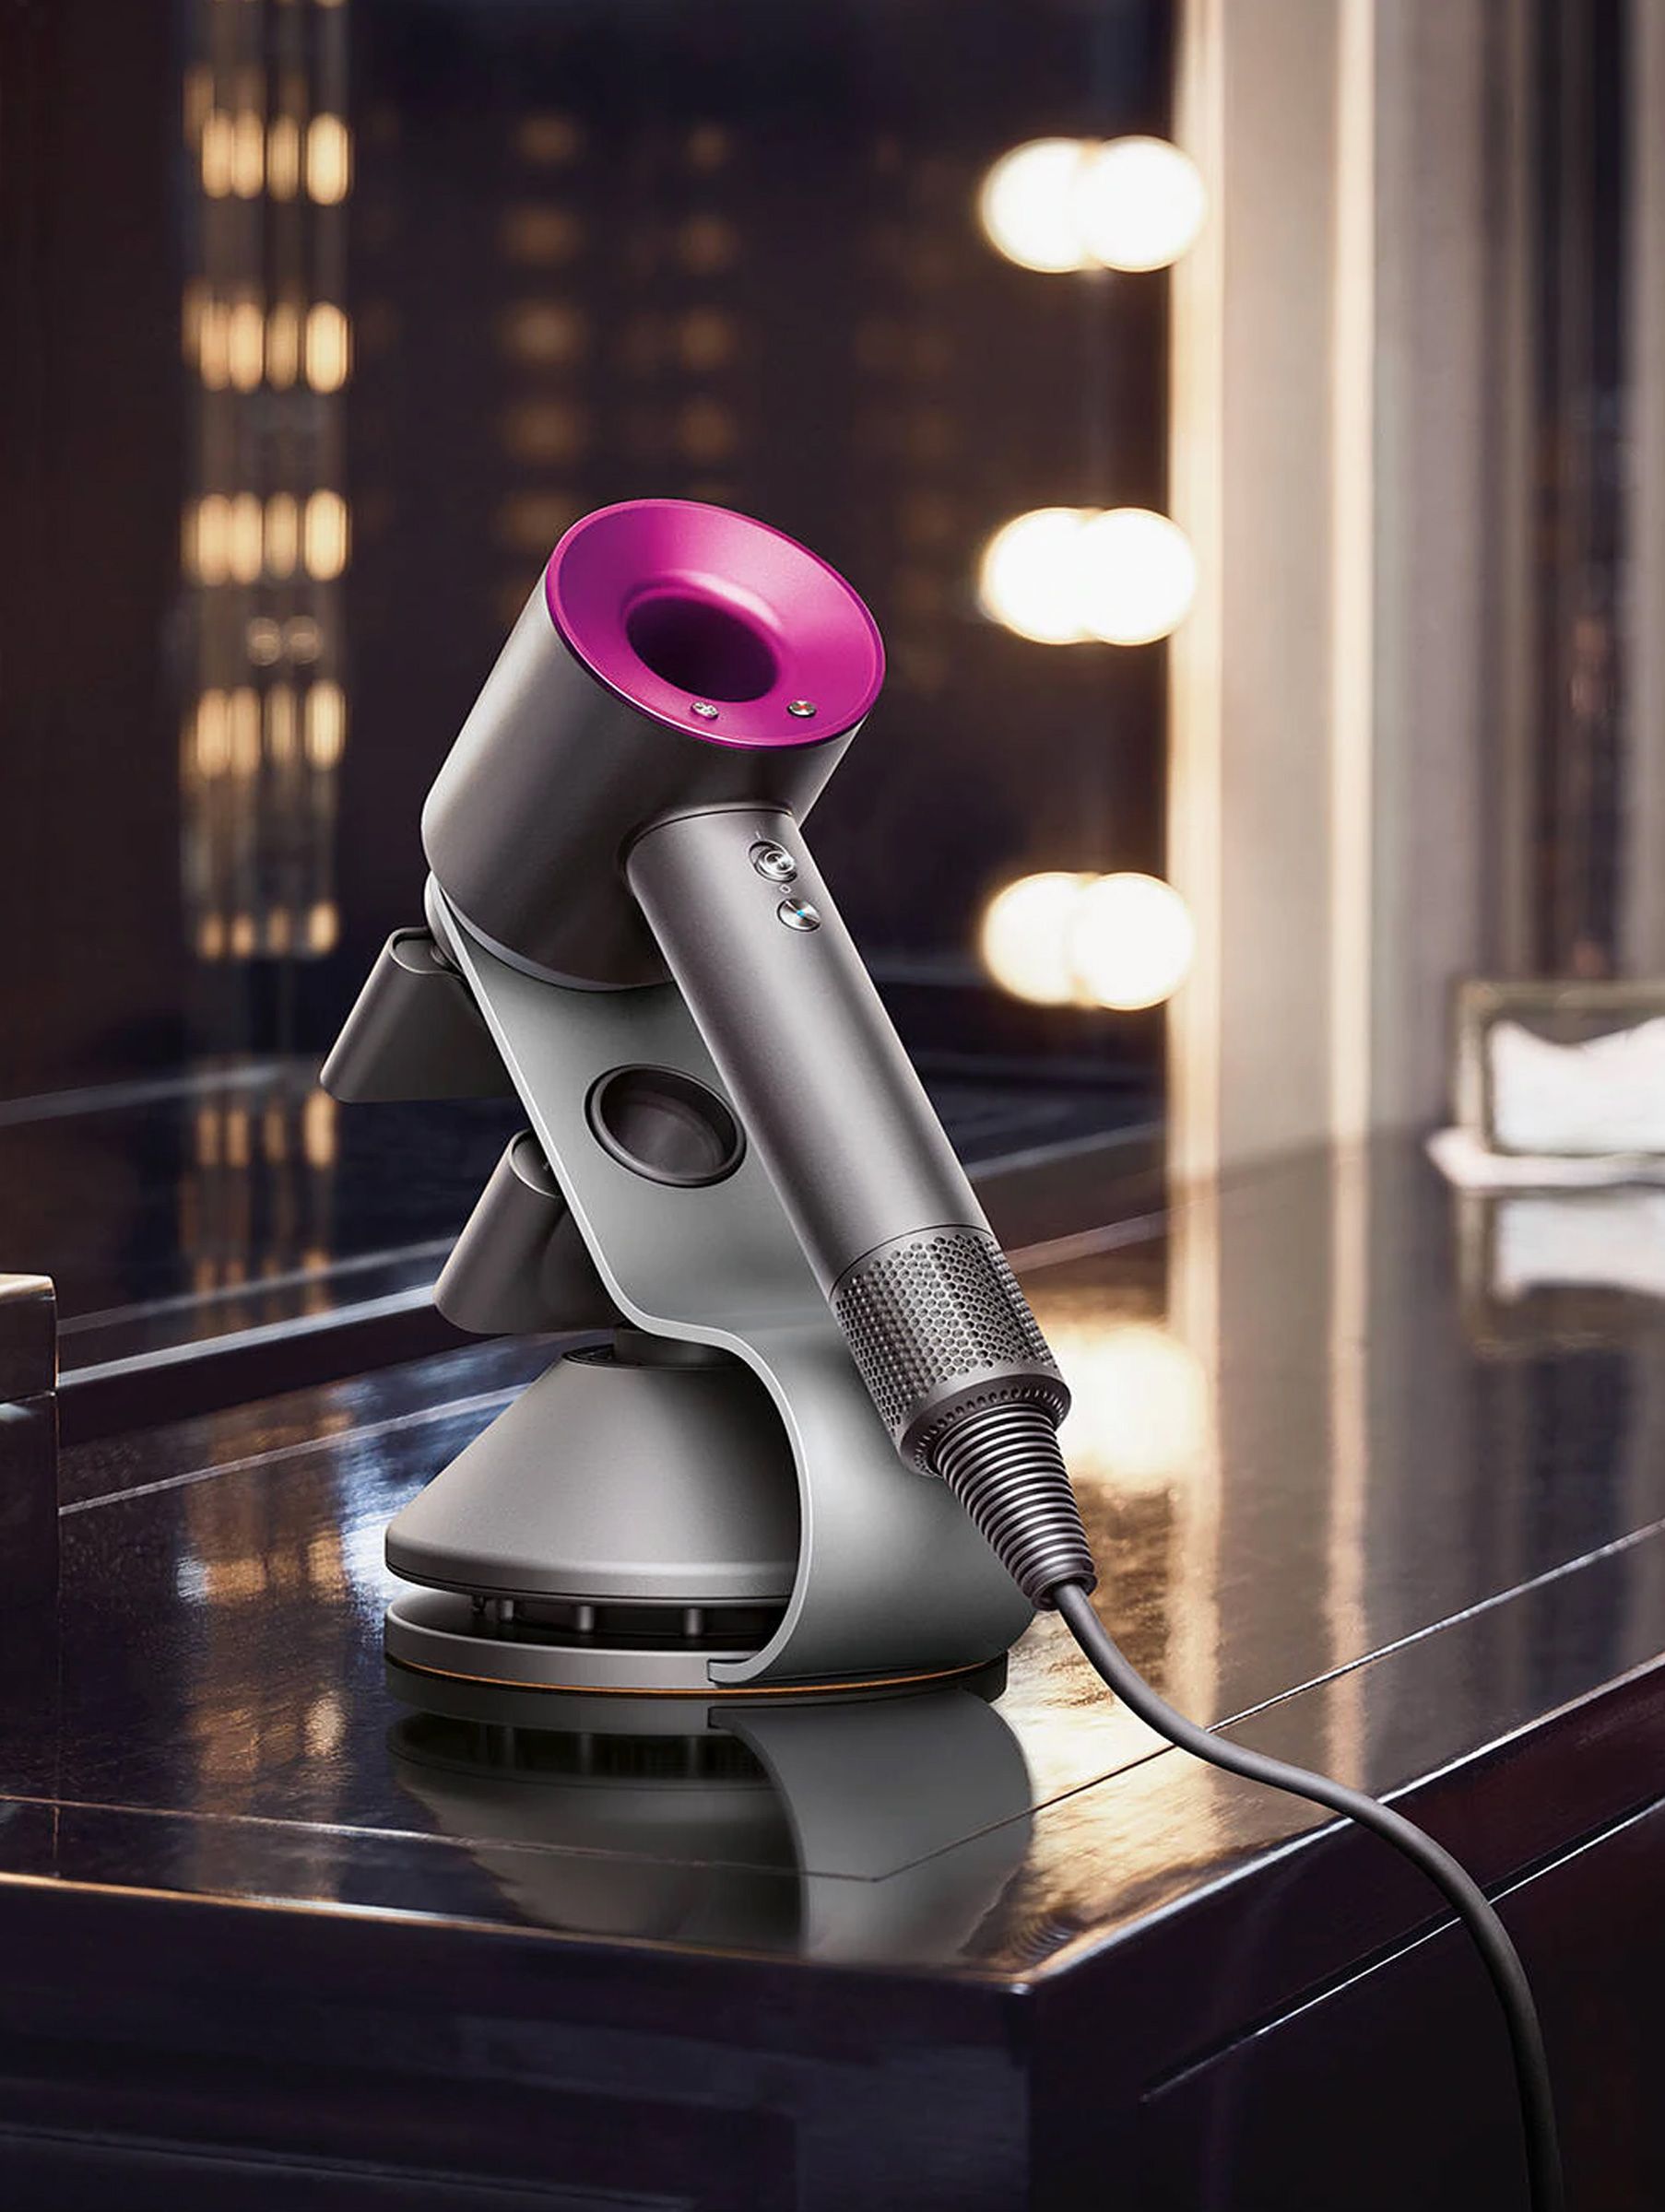 The Dyson Supersonic hairdryer